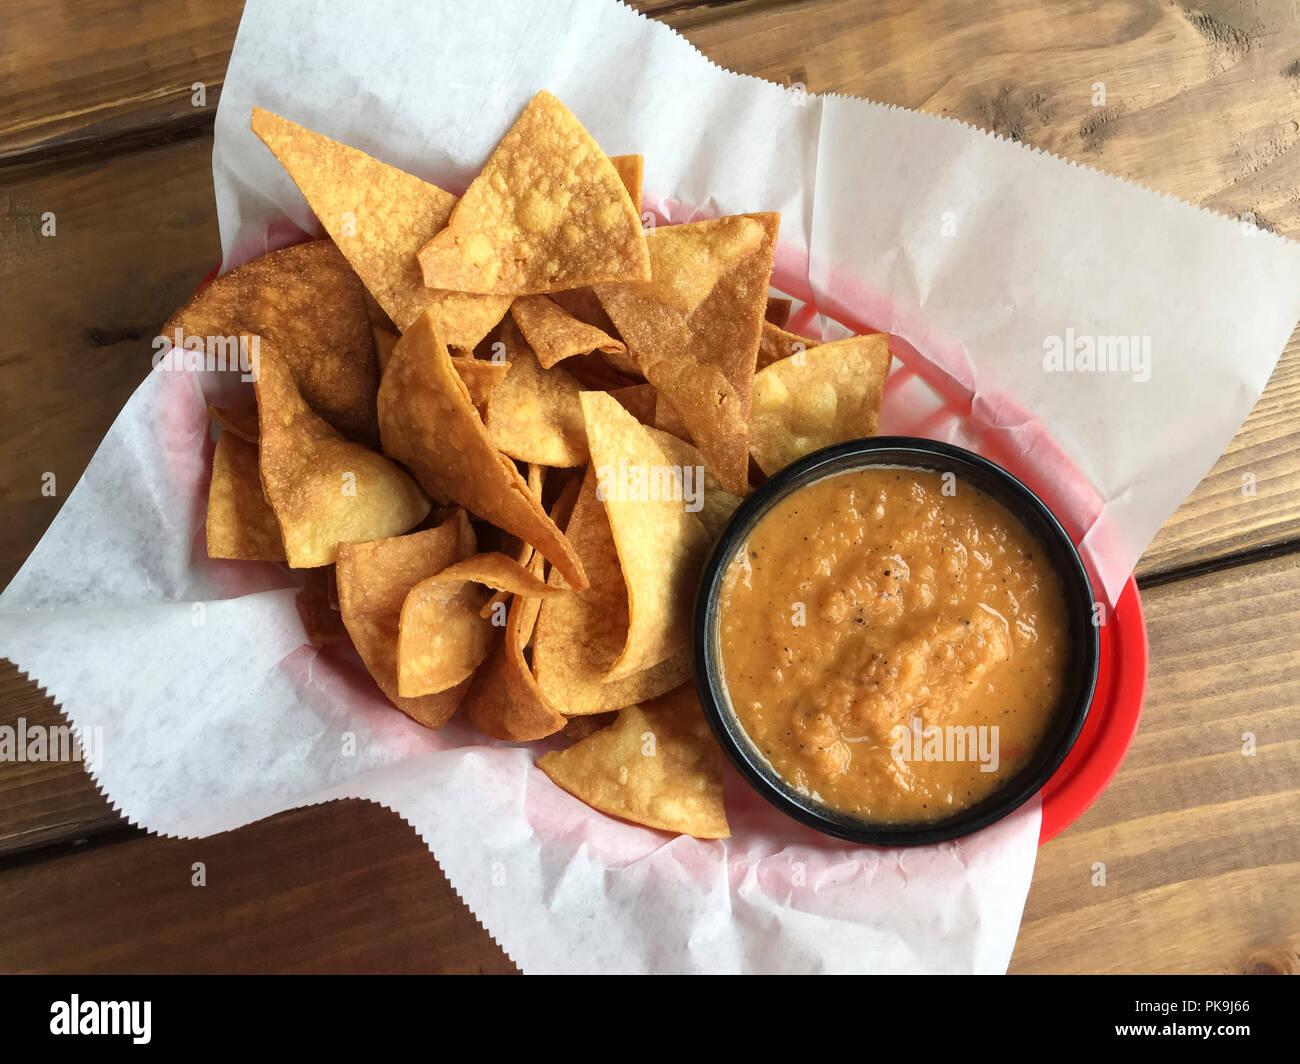 Overhead flat lay view of traditional casual Mexican snack foods tortilla chips and salsa in plastic basket lined with paper on rustic wooden table Stock Photo